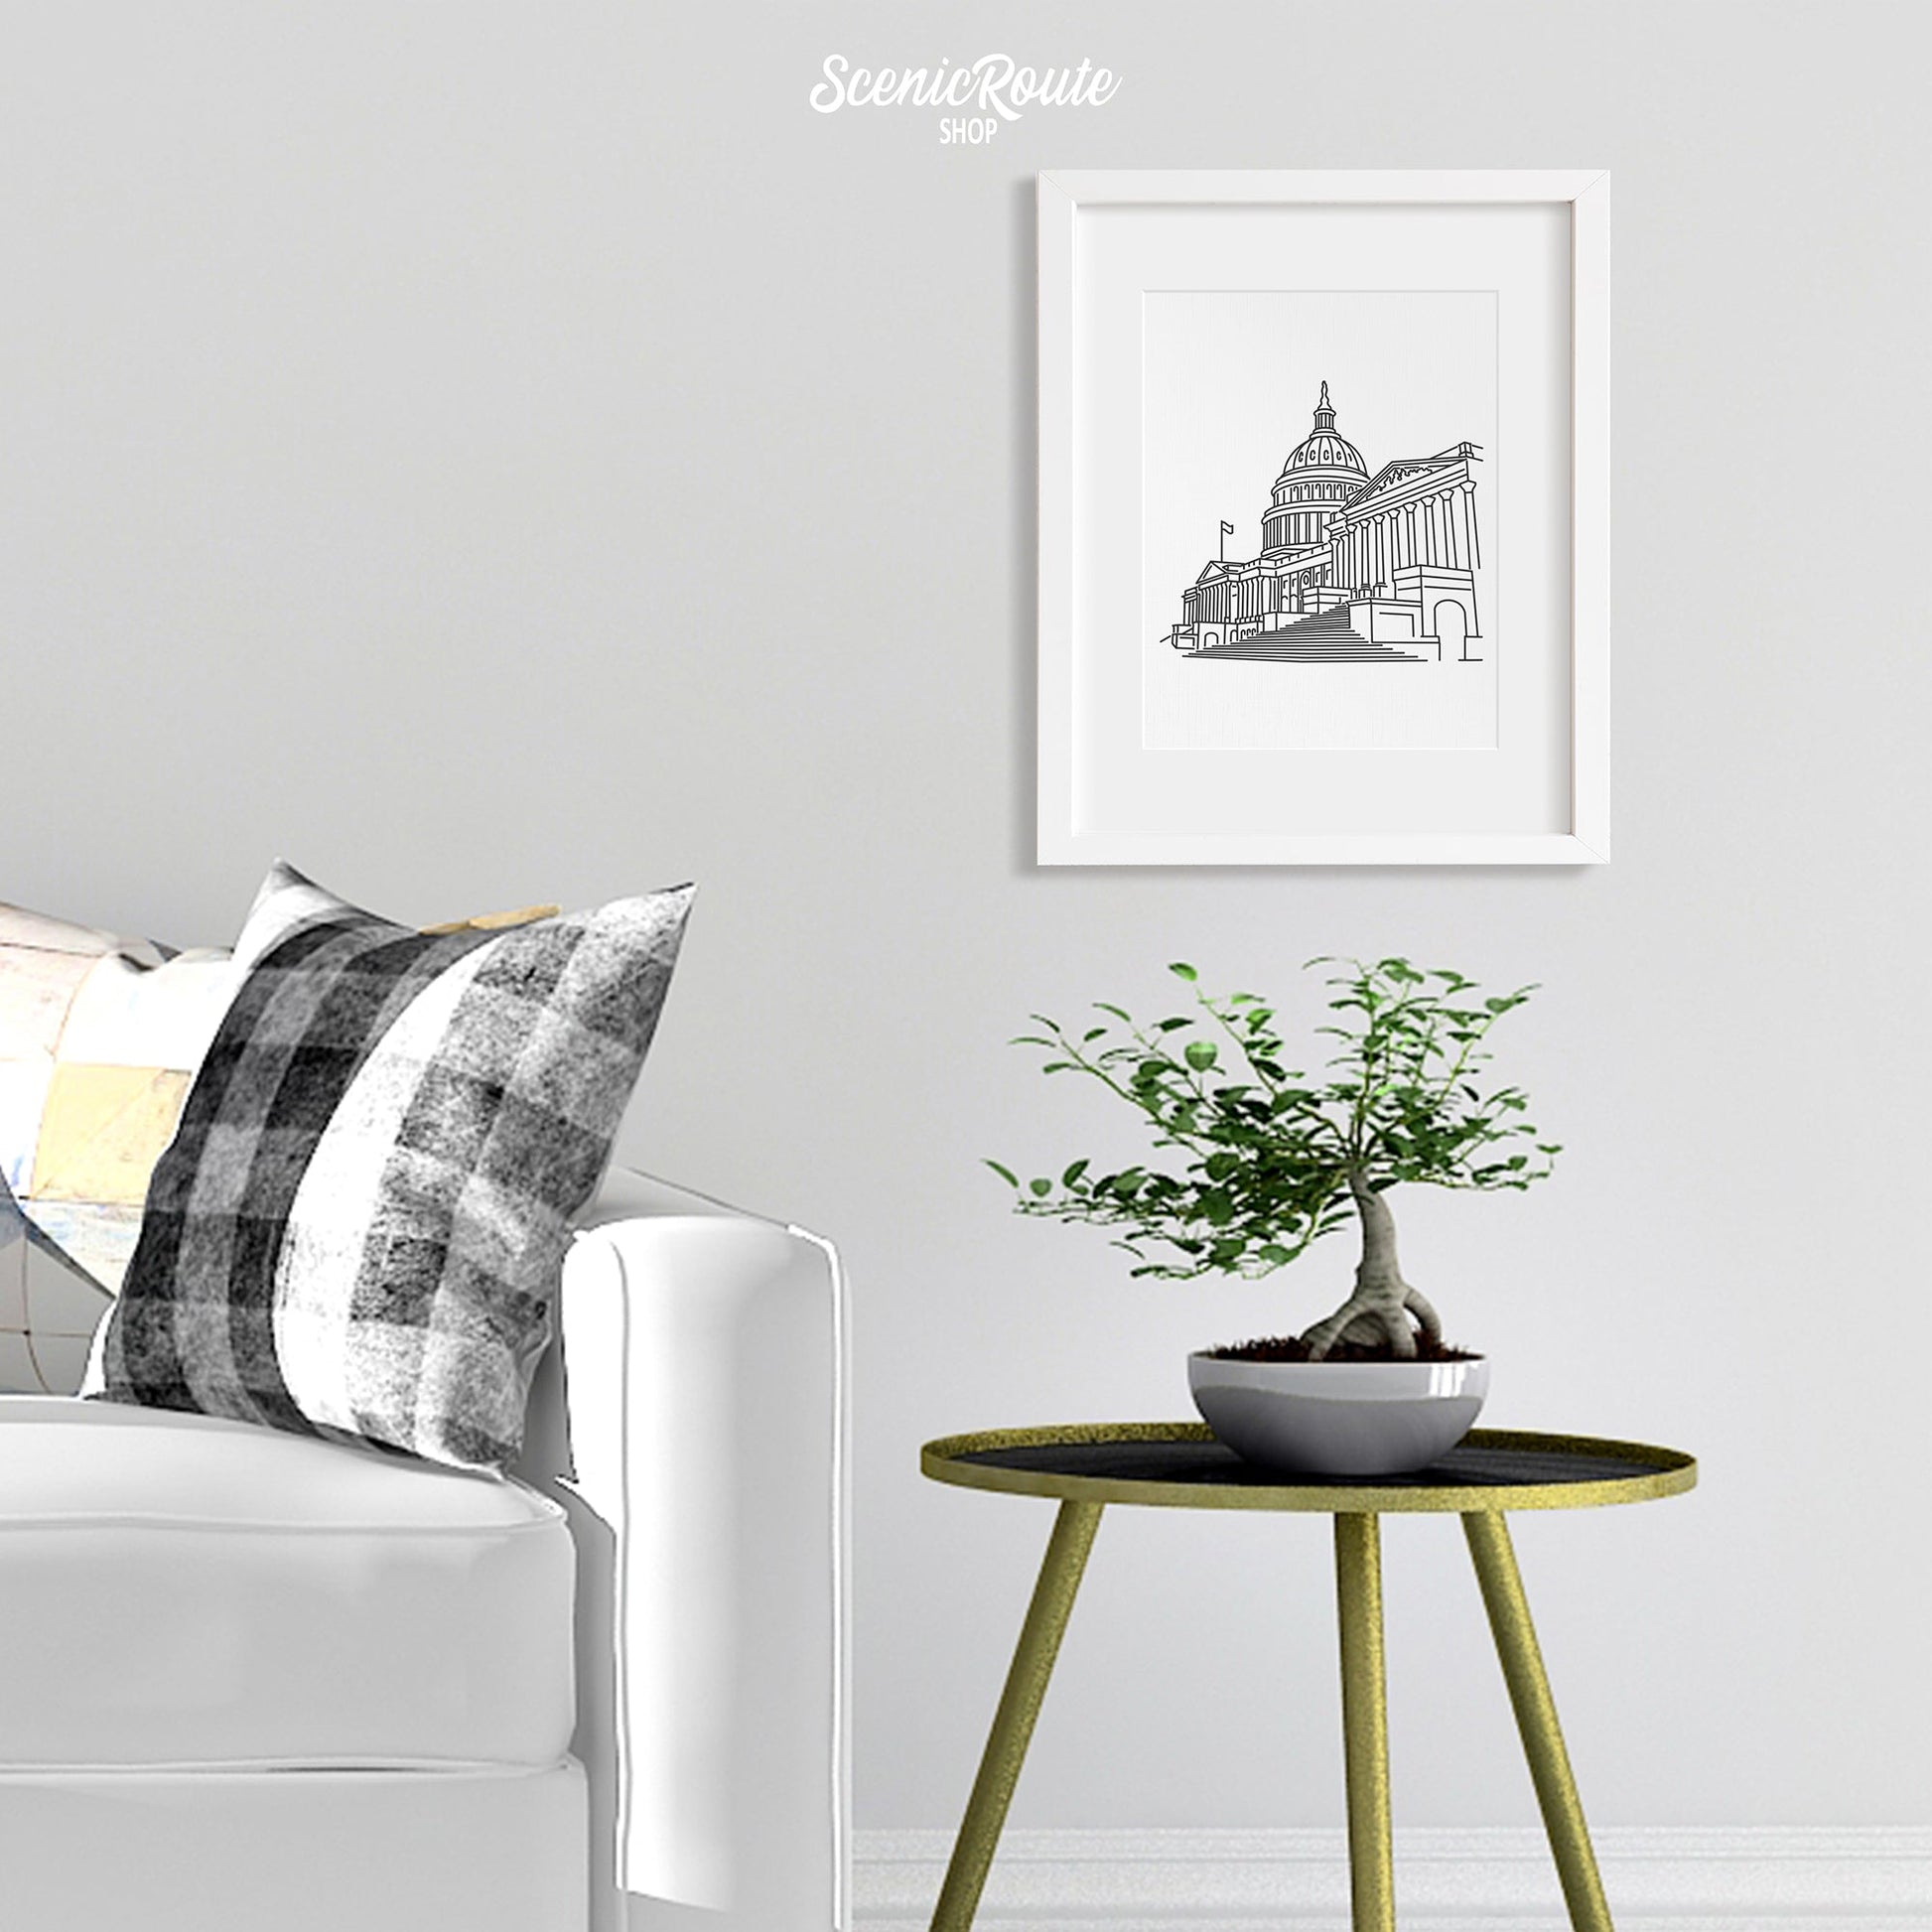 A framed line art drawing of the Capitol above a side table with a plant